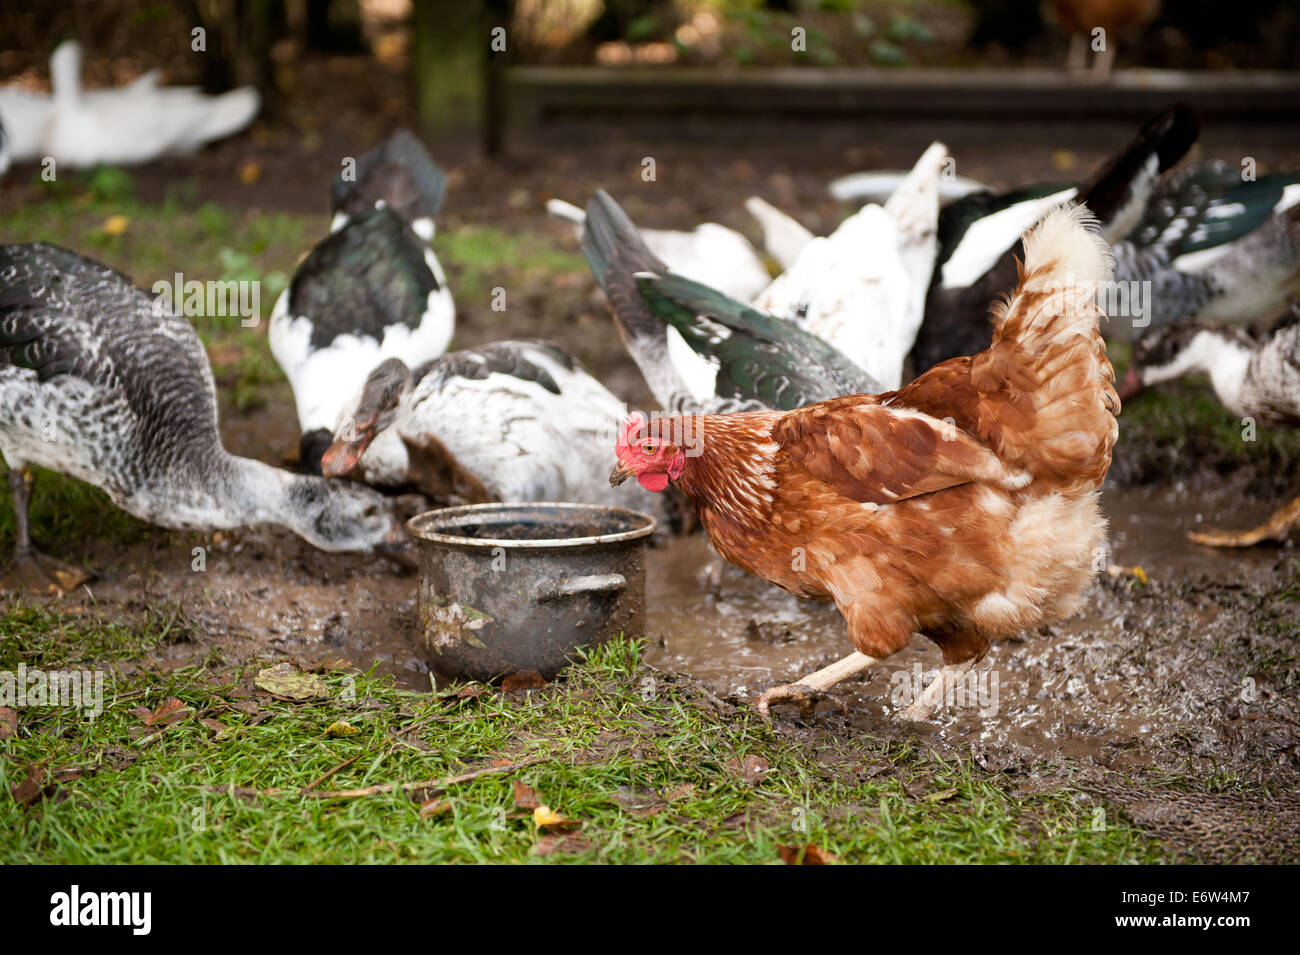 Chicken looking for food scratching mud Stock Photo